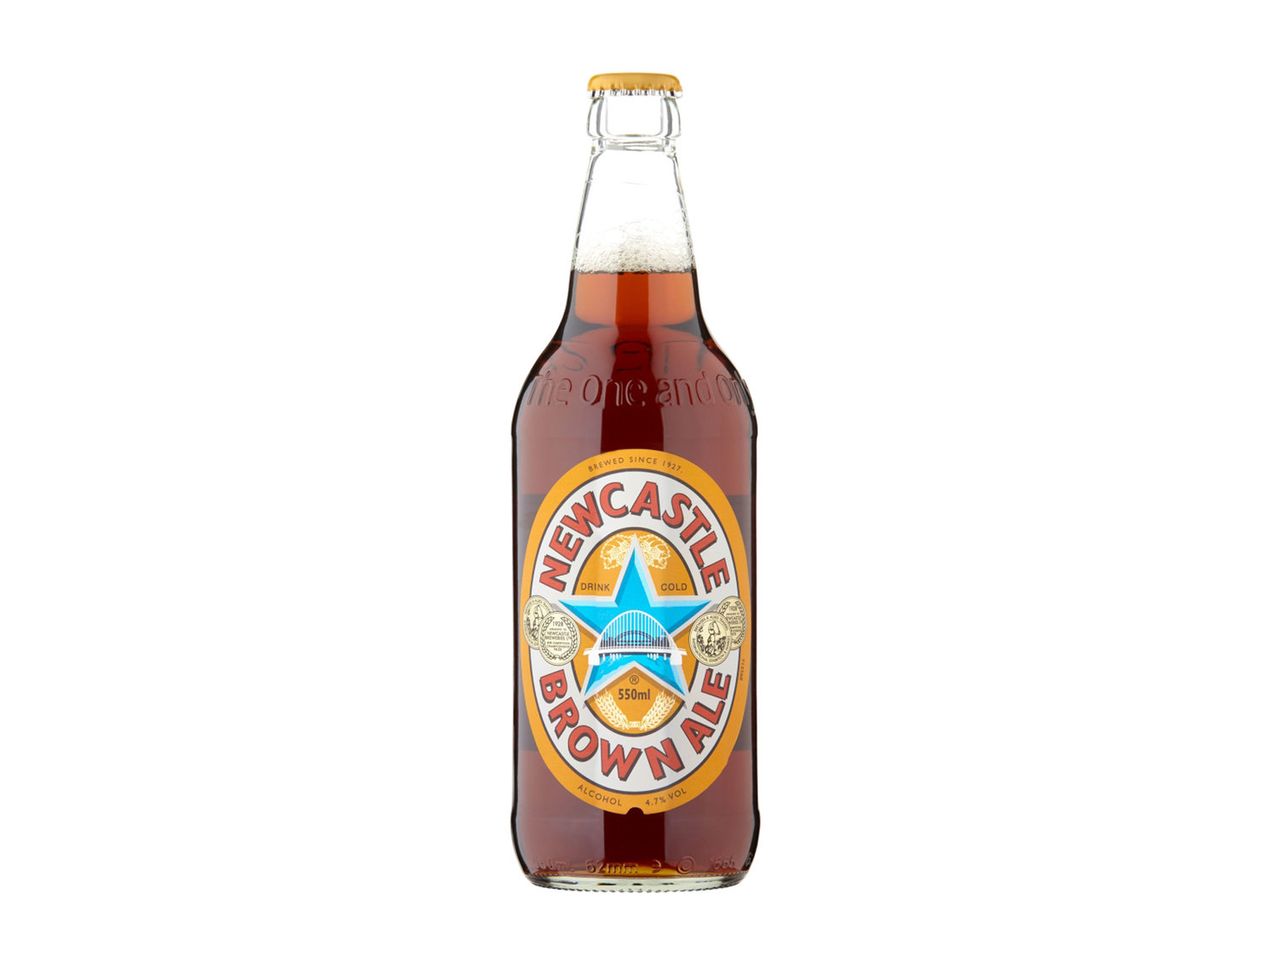 Go to full screen view: Newcastle Brown Ale - Image 1